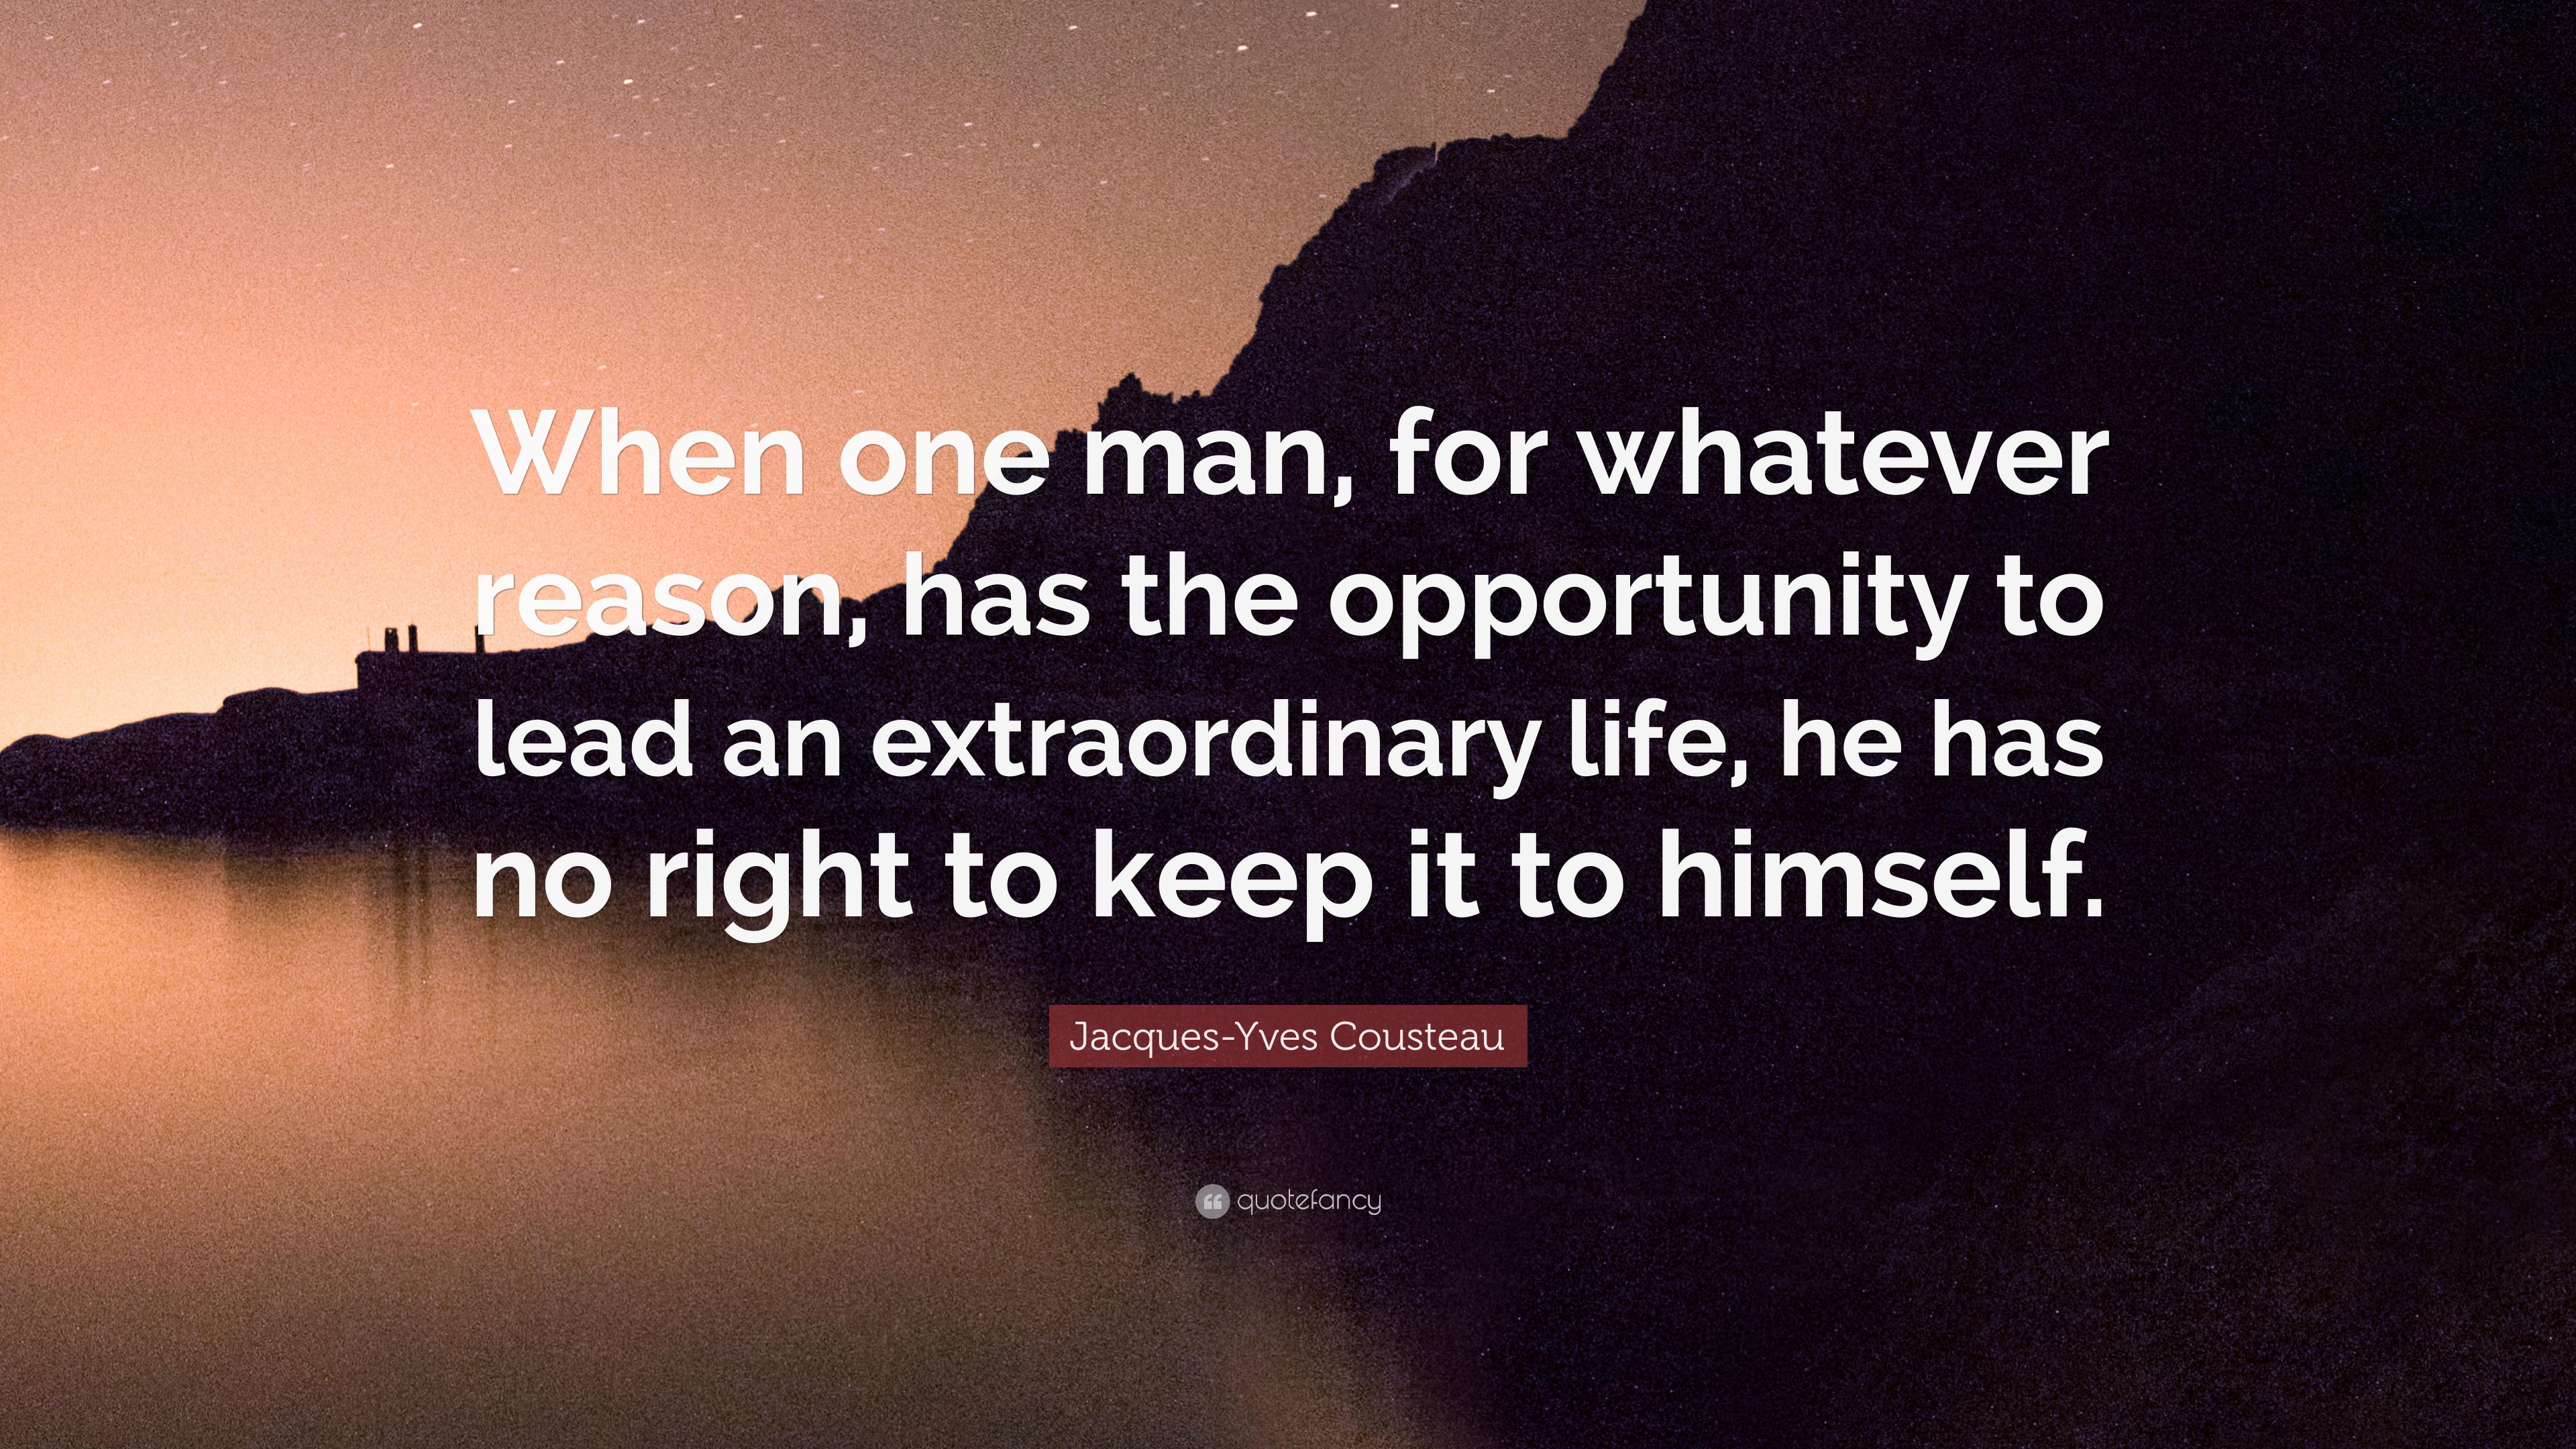 Jacques Yves Cousteau Quote: “When One Man, For Whatever Reason, Has